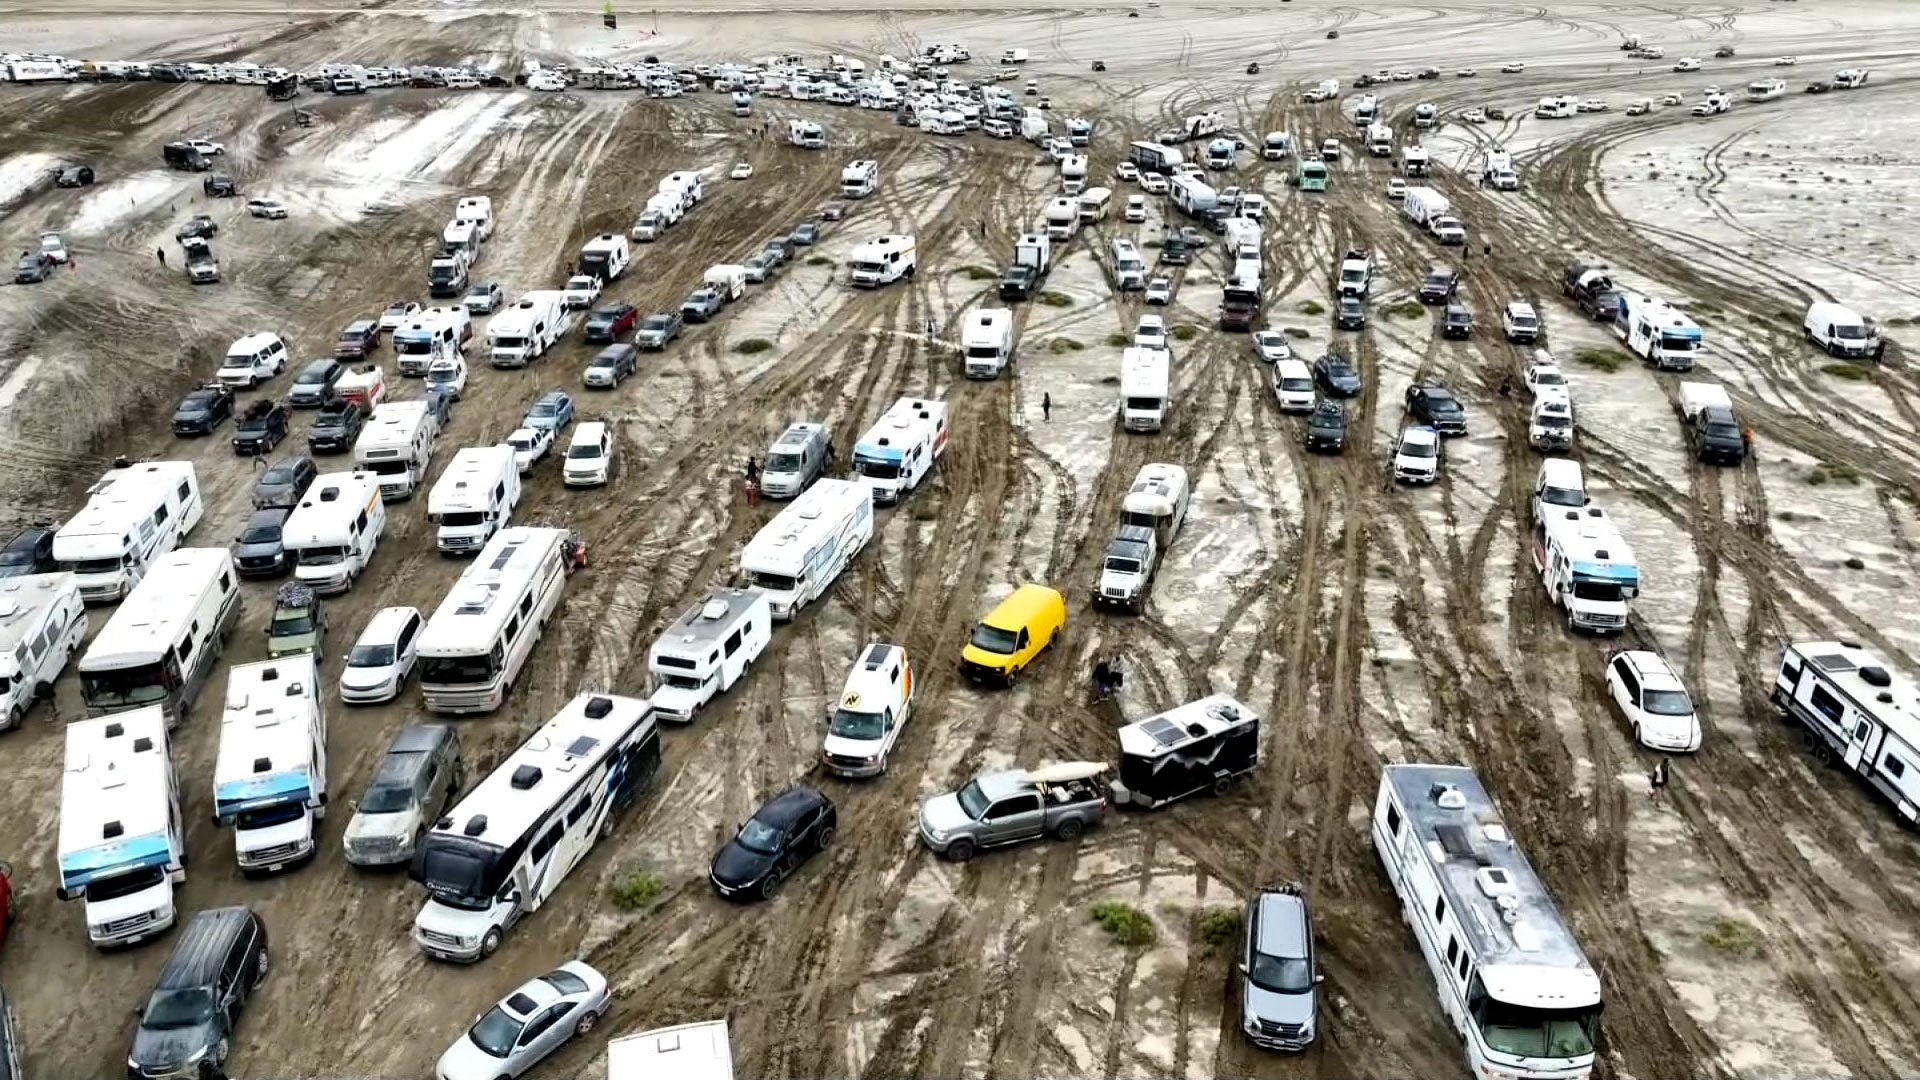 A still from a drone video shows vehicles trying to leave the Burning Man festival on Sunday, September 3.